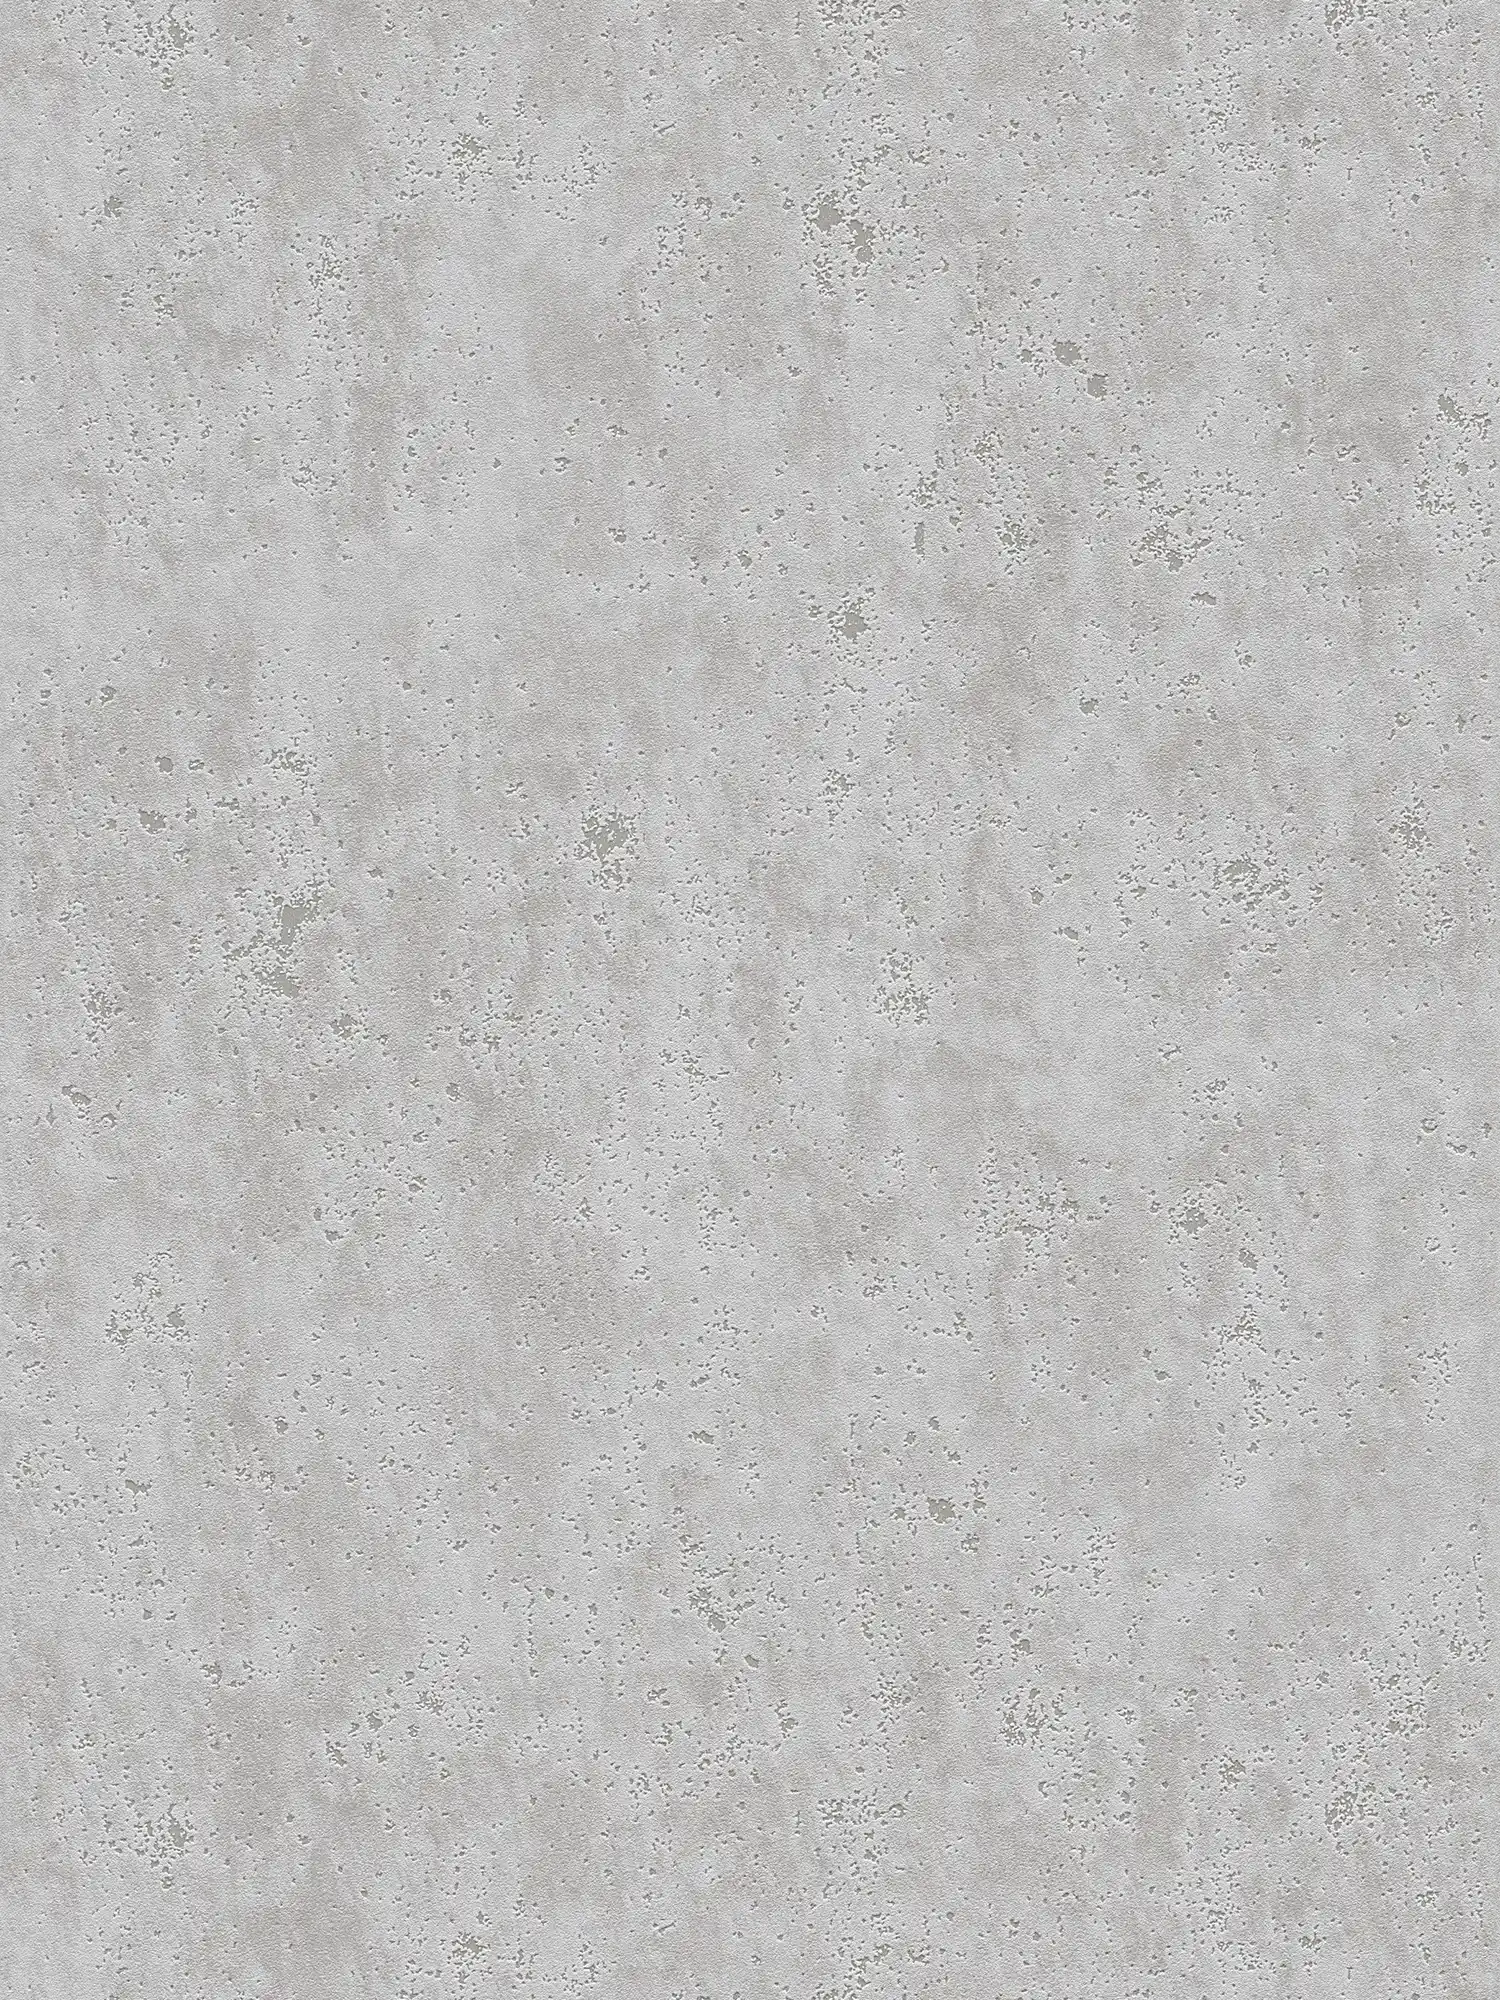 Wallpaper plaster look with rough surface texture - grey
